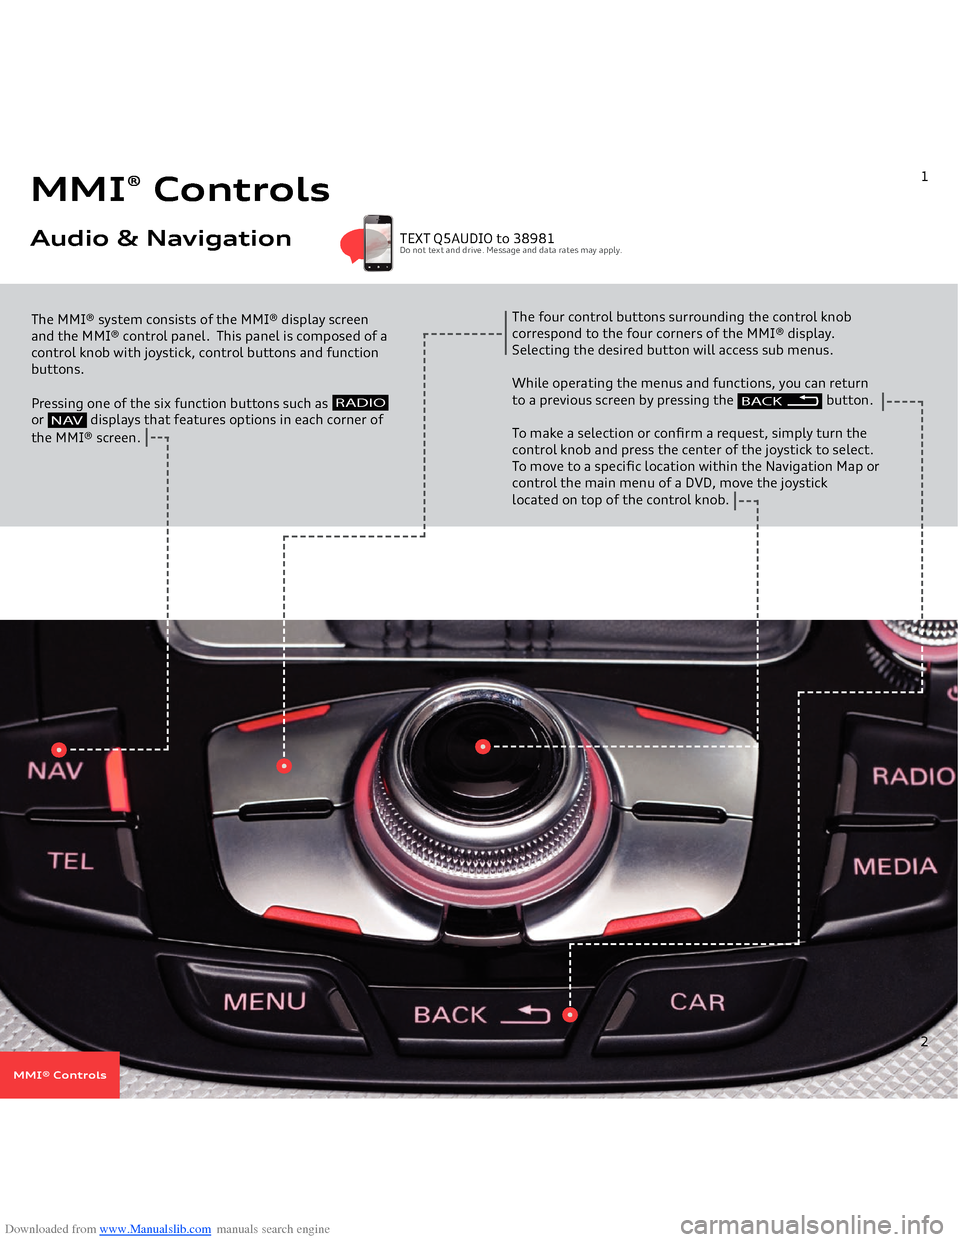 AUDI Q5 2014 8R / 1.G Getting To Know Downloaded from www.Manualslib.com manuals search engine MMI
® Controls
Audio & Navigation
 
The MMI® system consists of the MMI® display screen and the MMI® control panel.  This panel is composed